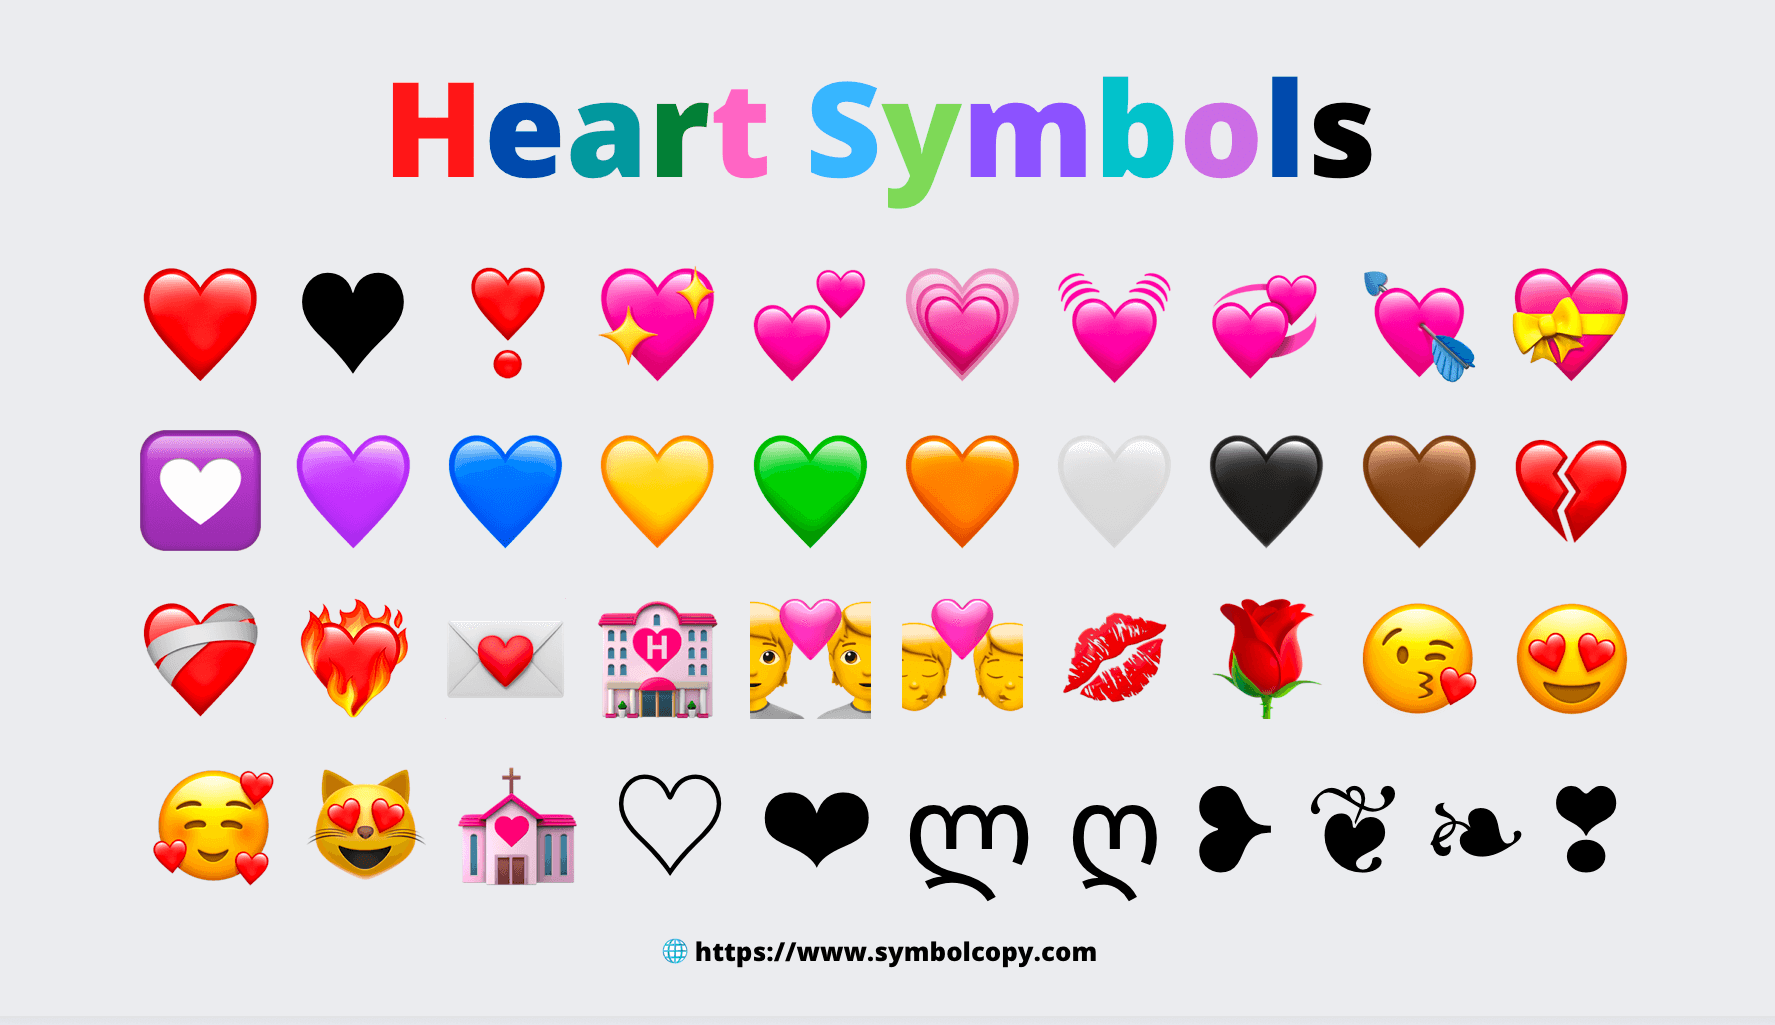 Heart Symbol Copy and Paste ♡????❤????❣????♥????❦????????